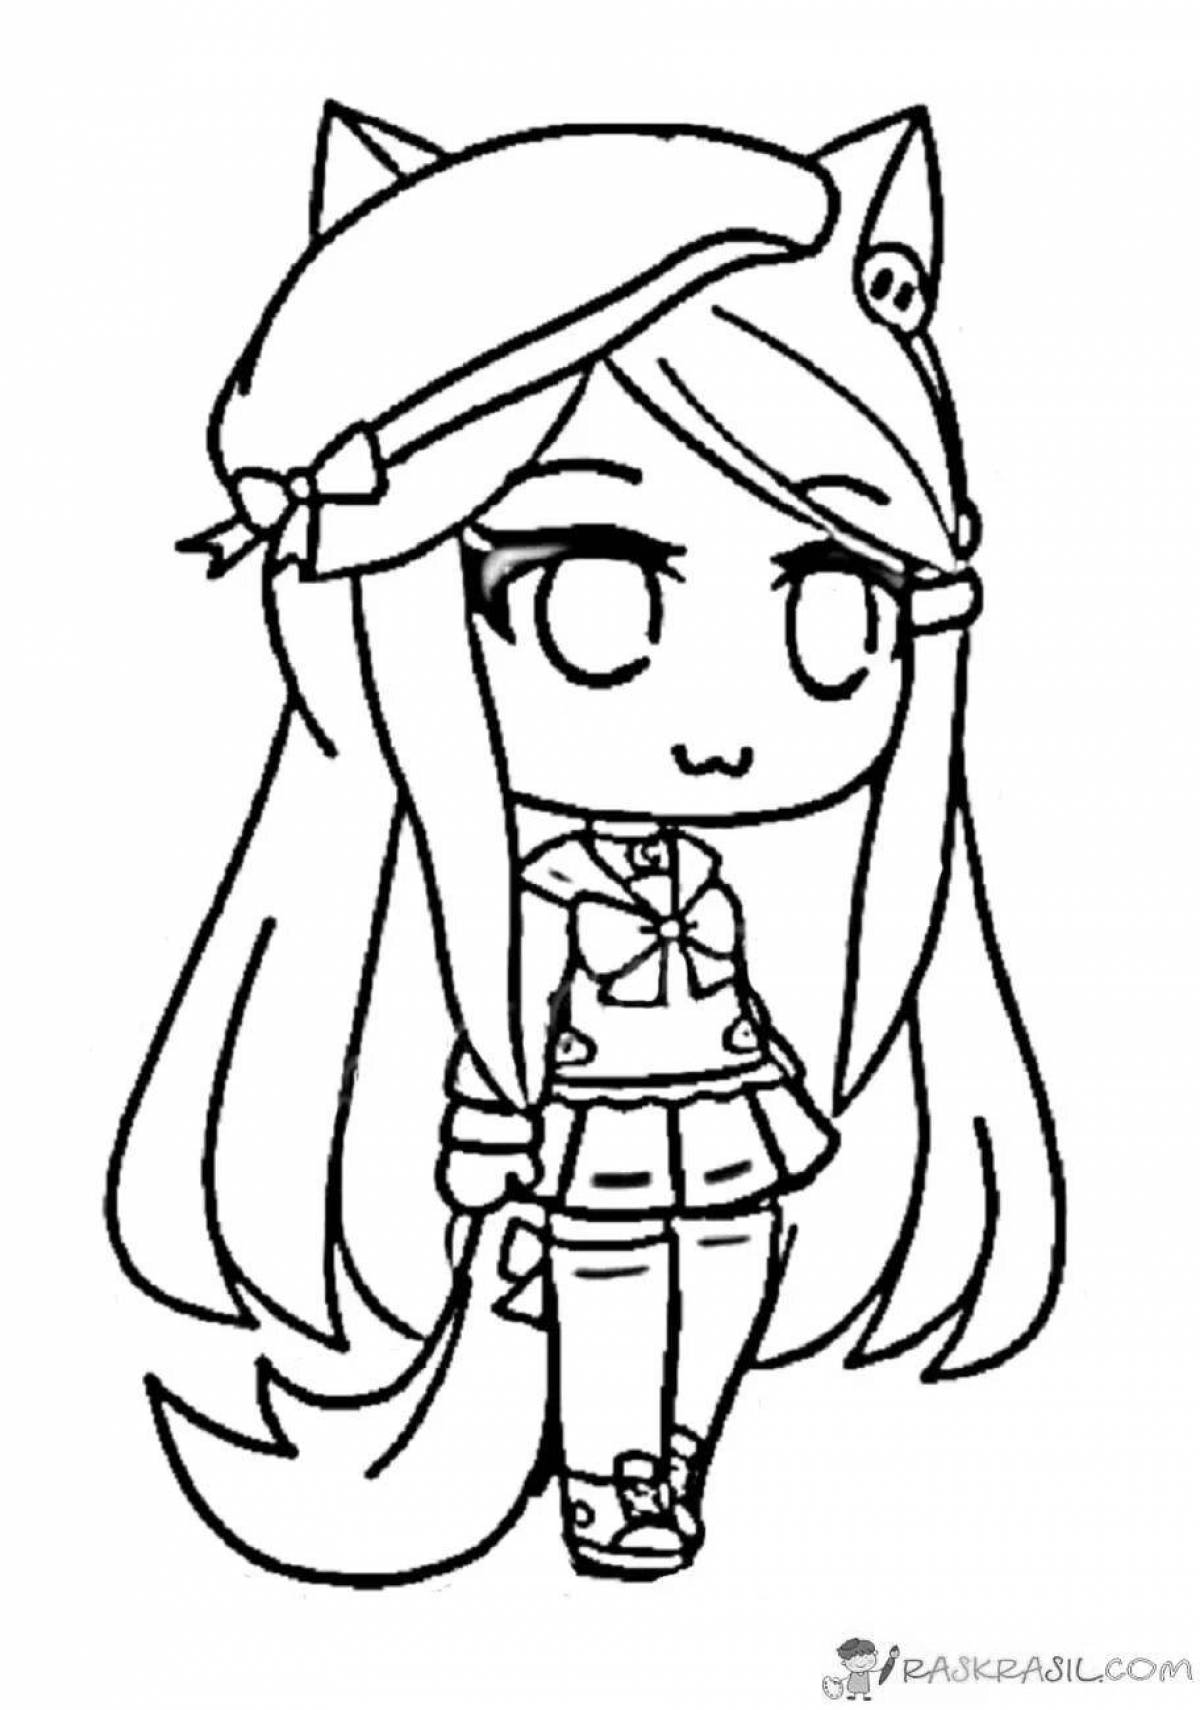 Playful gachalife coloring page